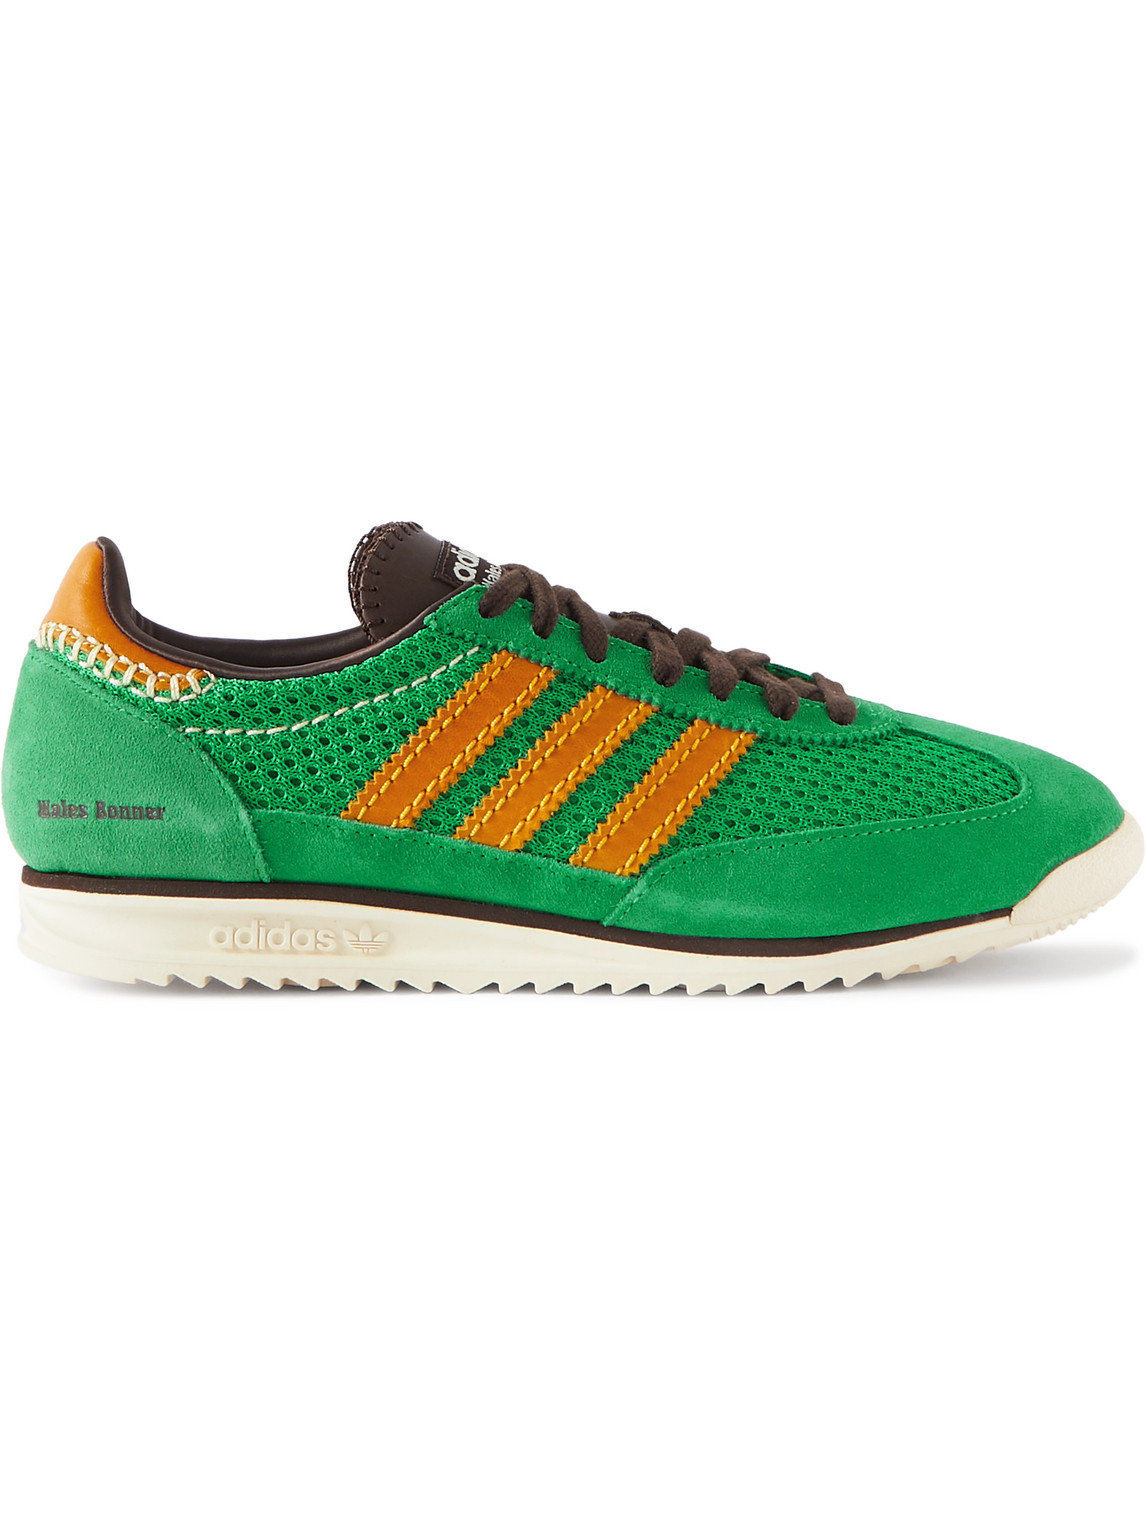 Adidas Consortium Wales Bonner Sl72 Suede And Mesh Sneakers In Green